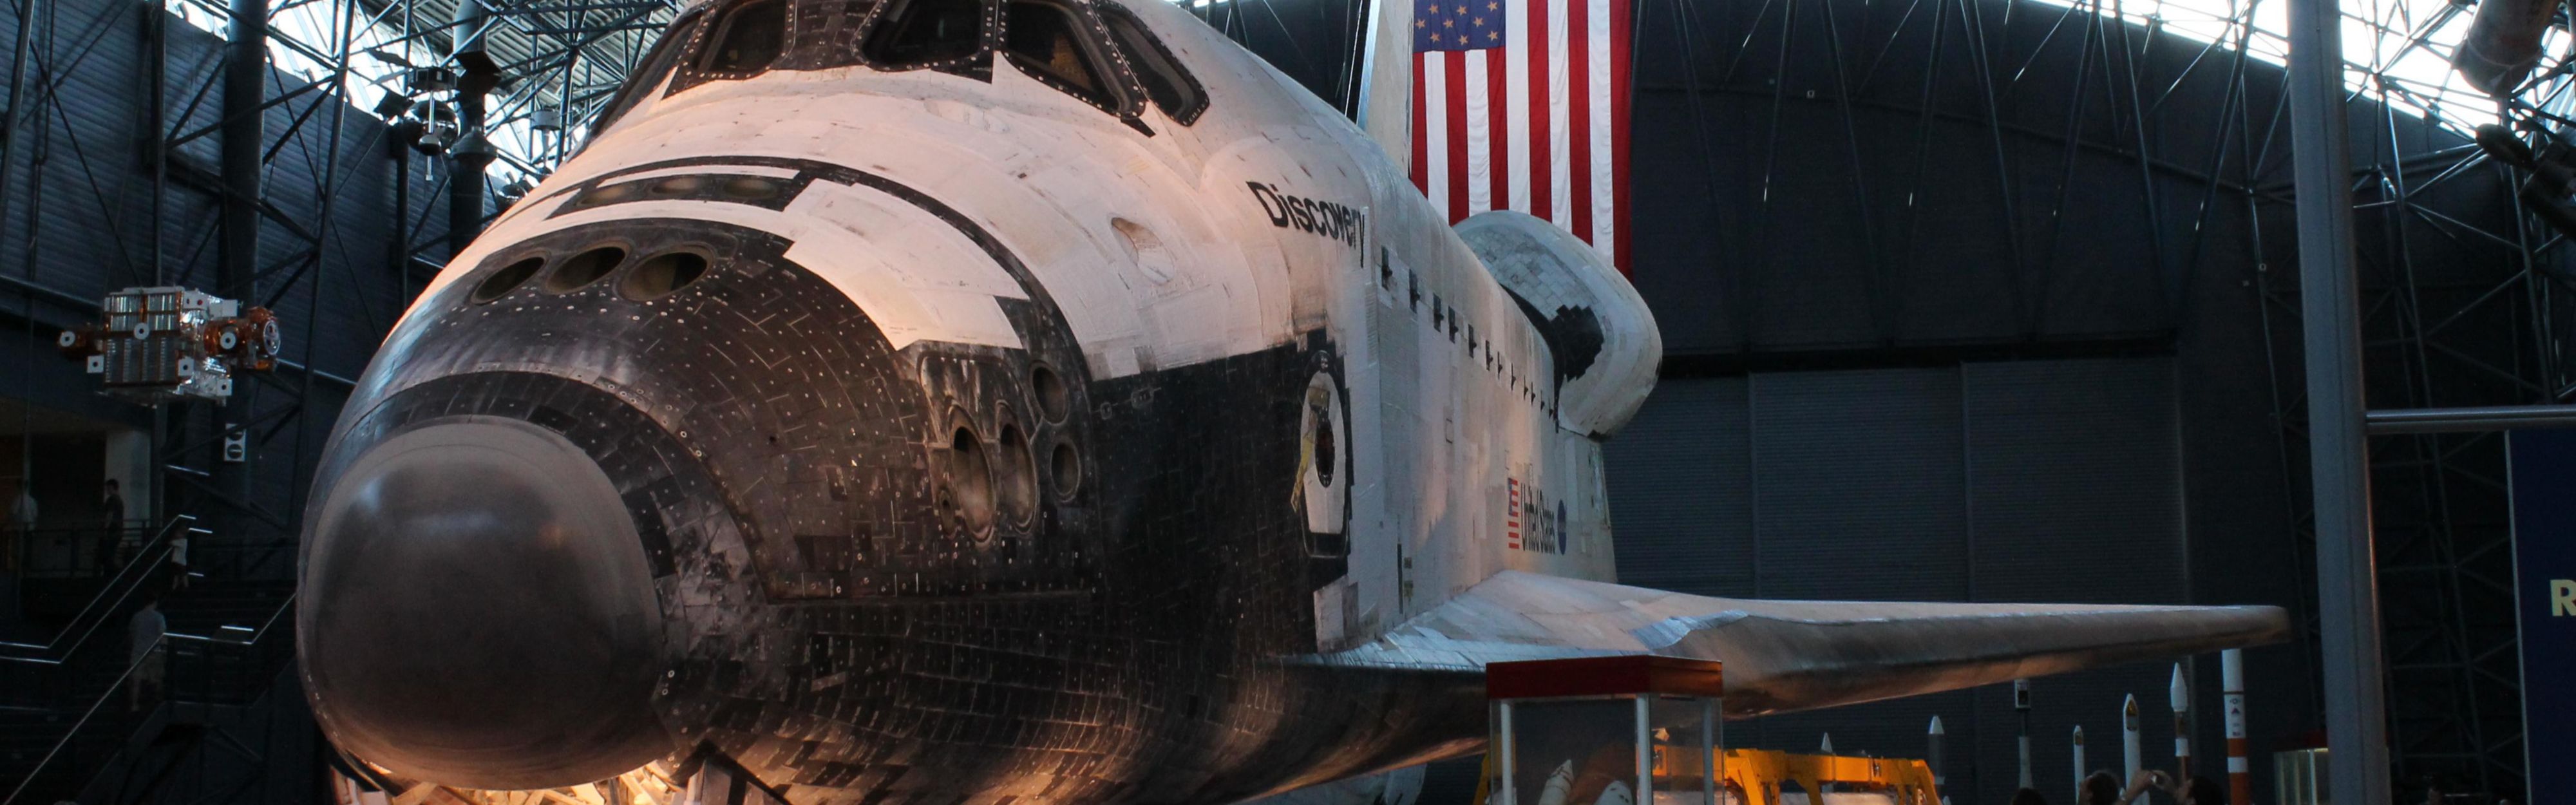 See the Shuttle Discovery at Smithsonian's Air and Space Museum